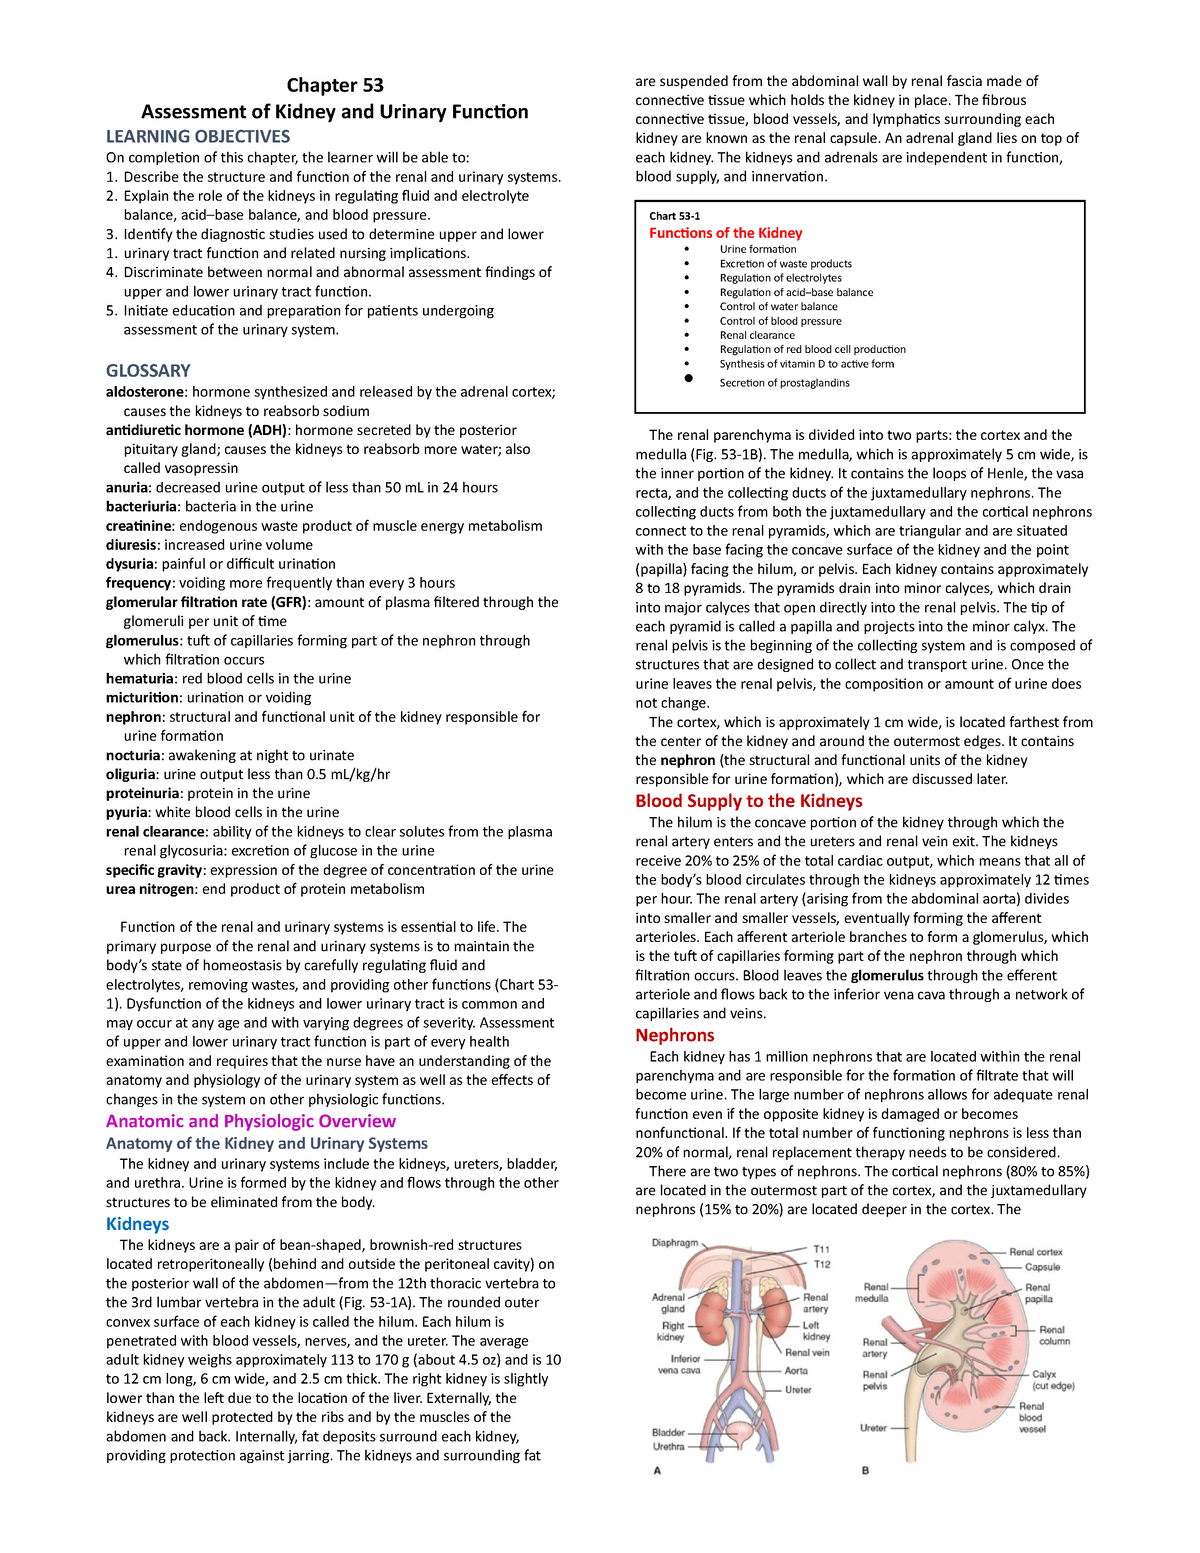 case study chapter 53 assessment of kidney and urinary function